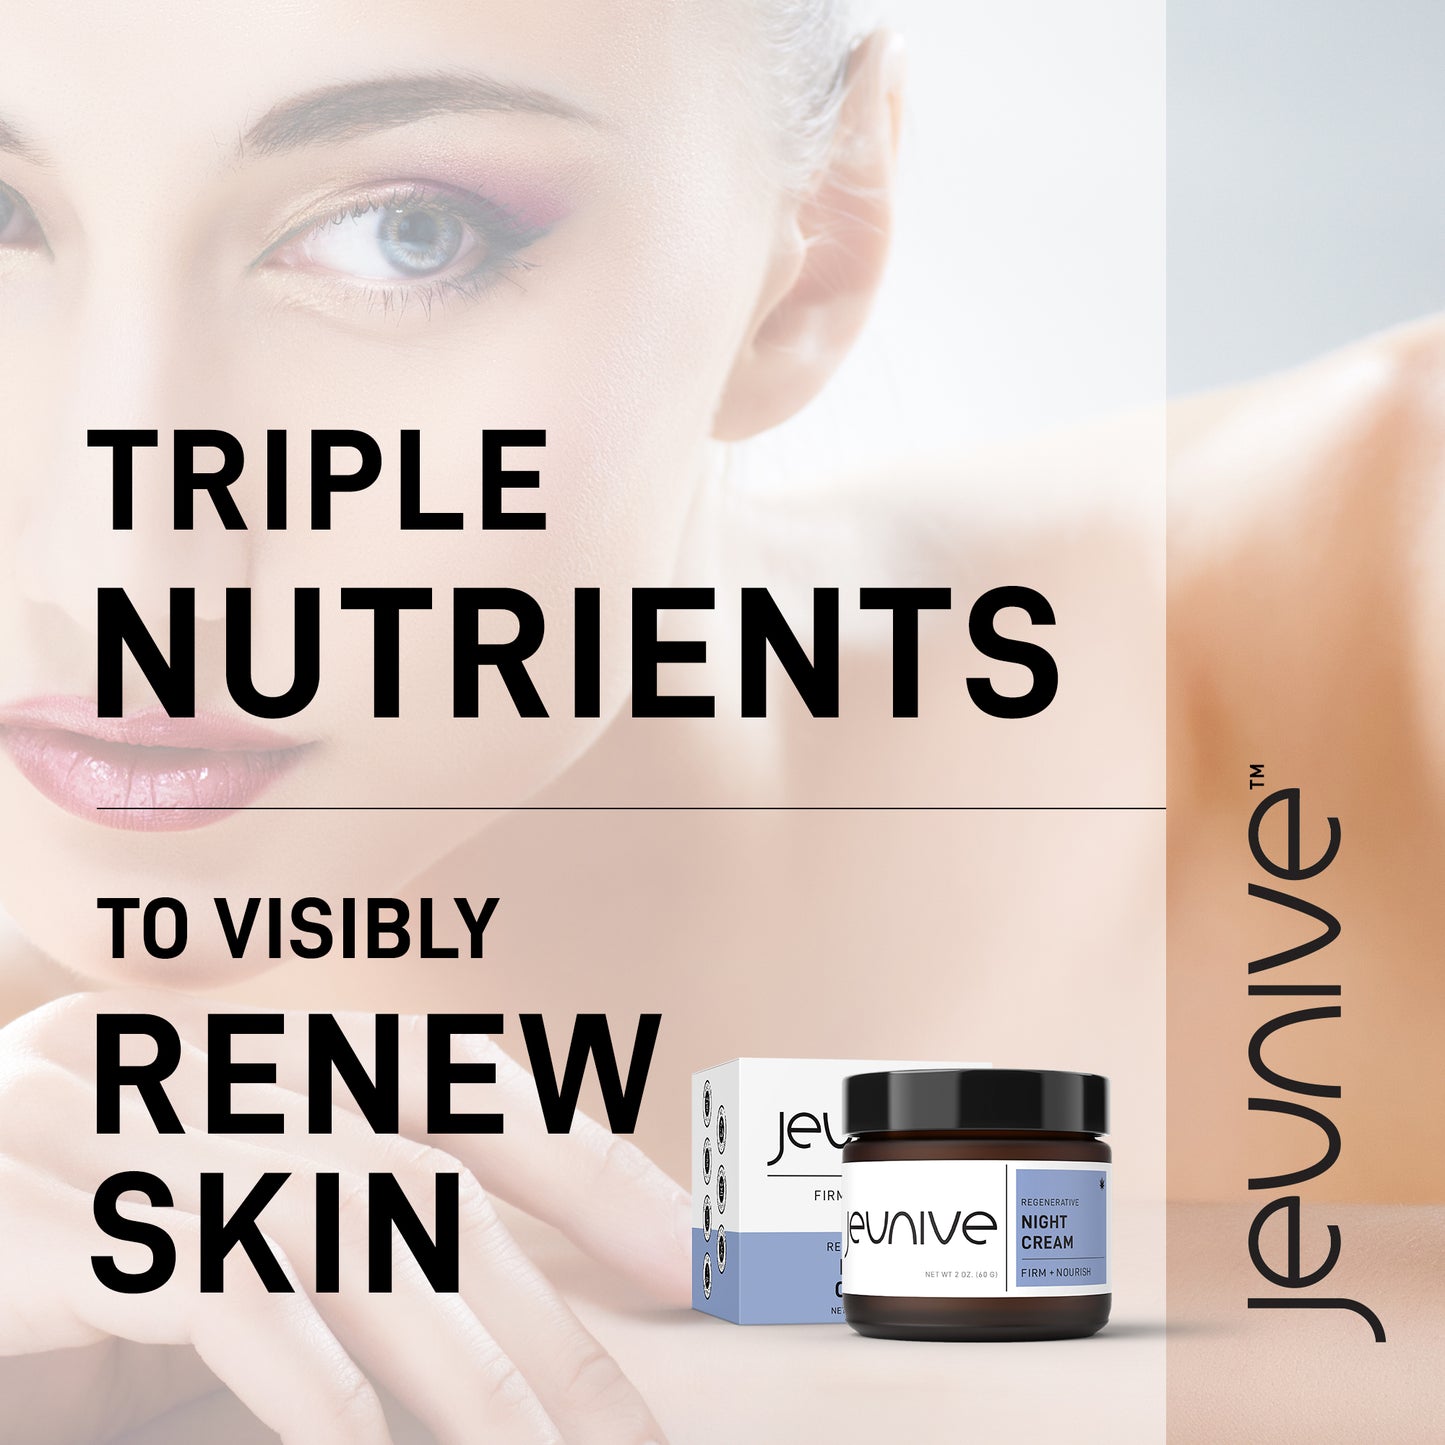 Jeunive Regeneartive Triple Nutrients Night Cream to Visibly Firm, Nourish and Renew your Skin.